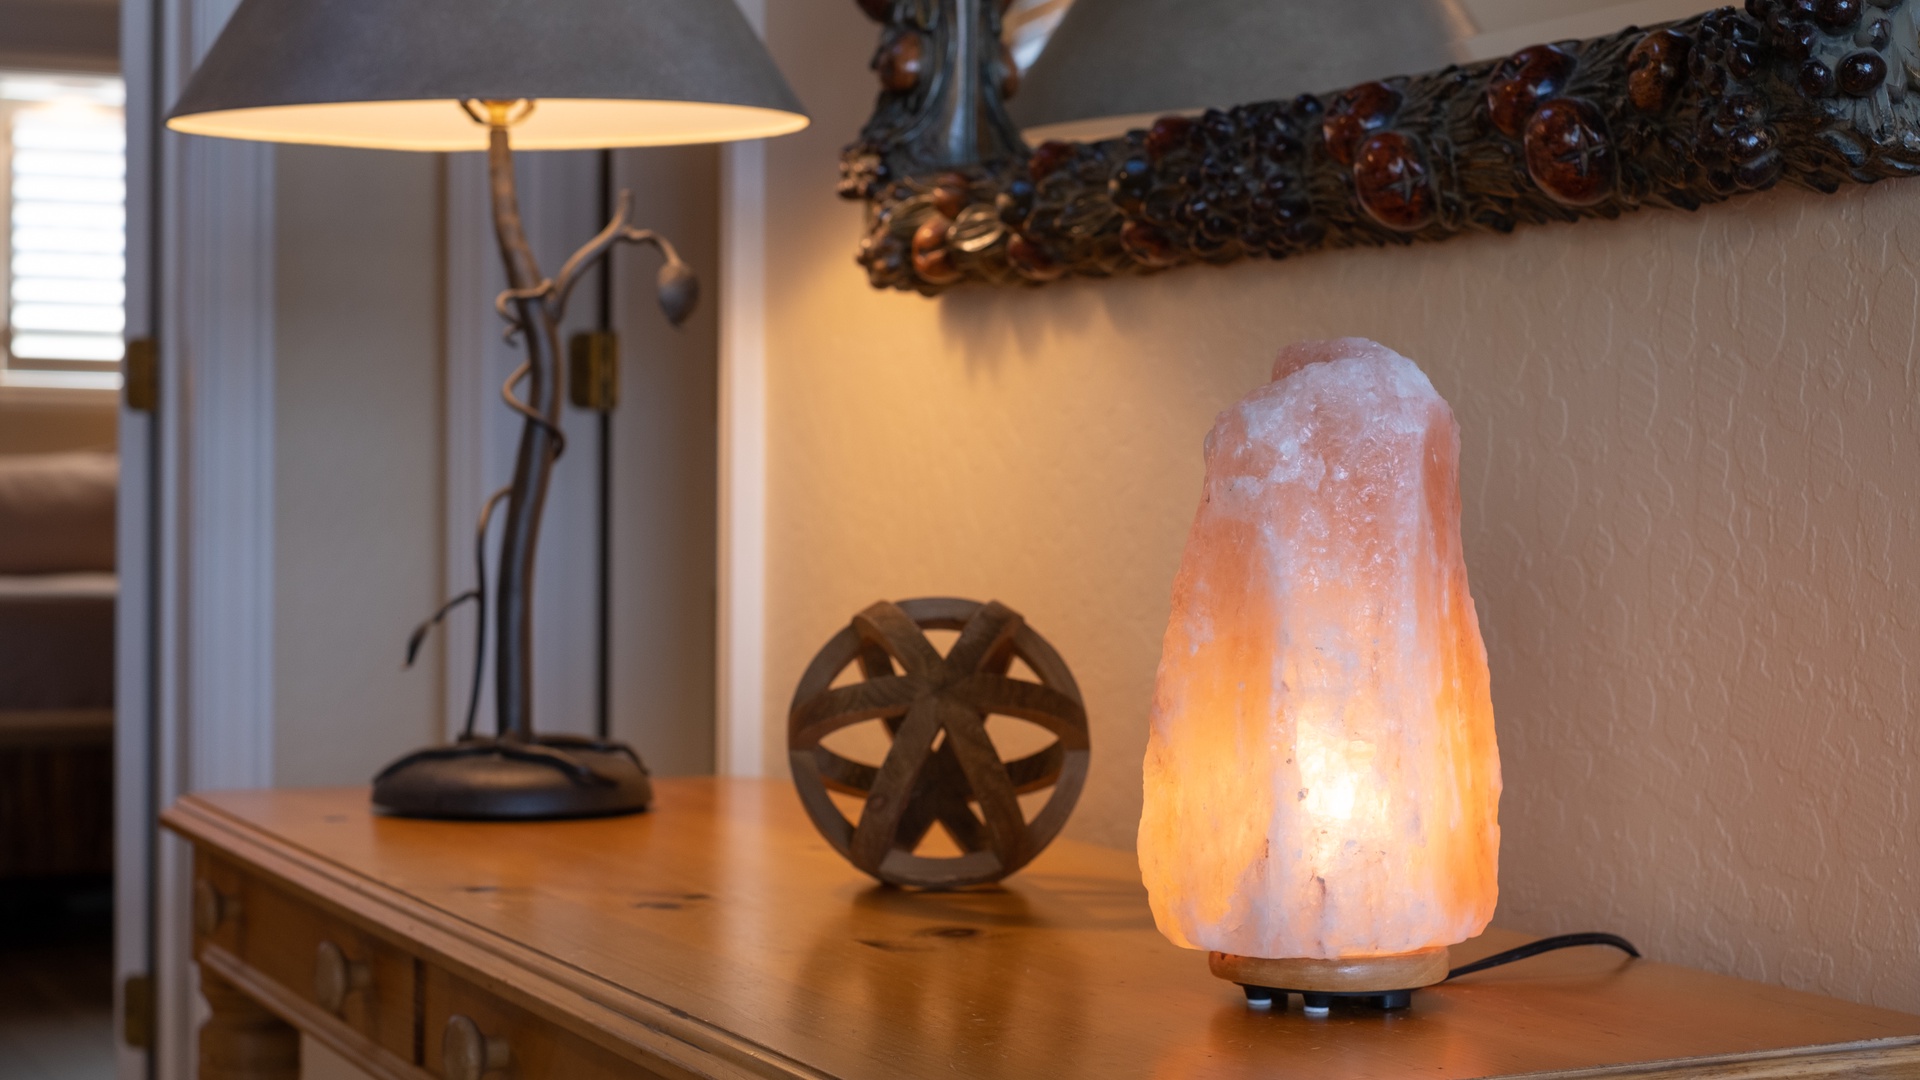 Salt lamp in hallway: Northstar Home Away From Home